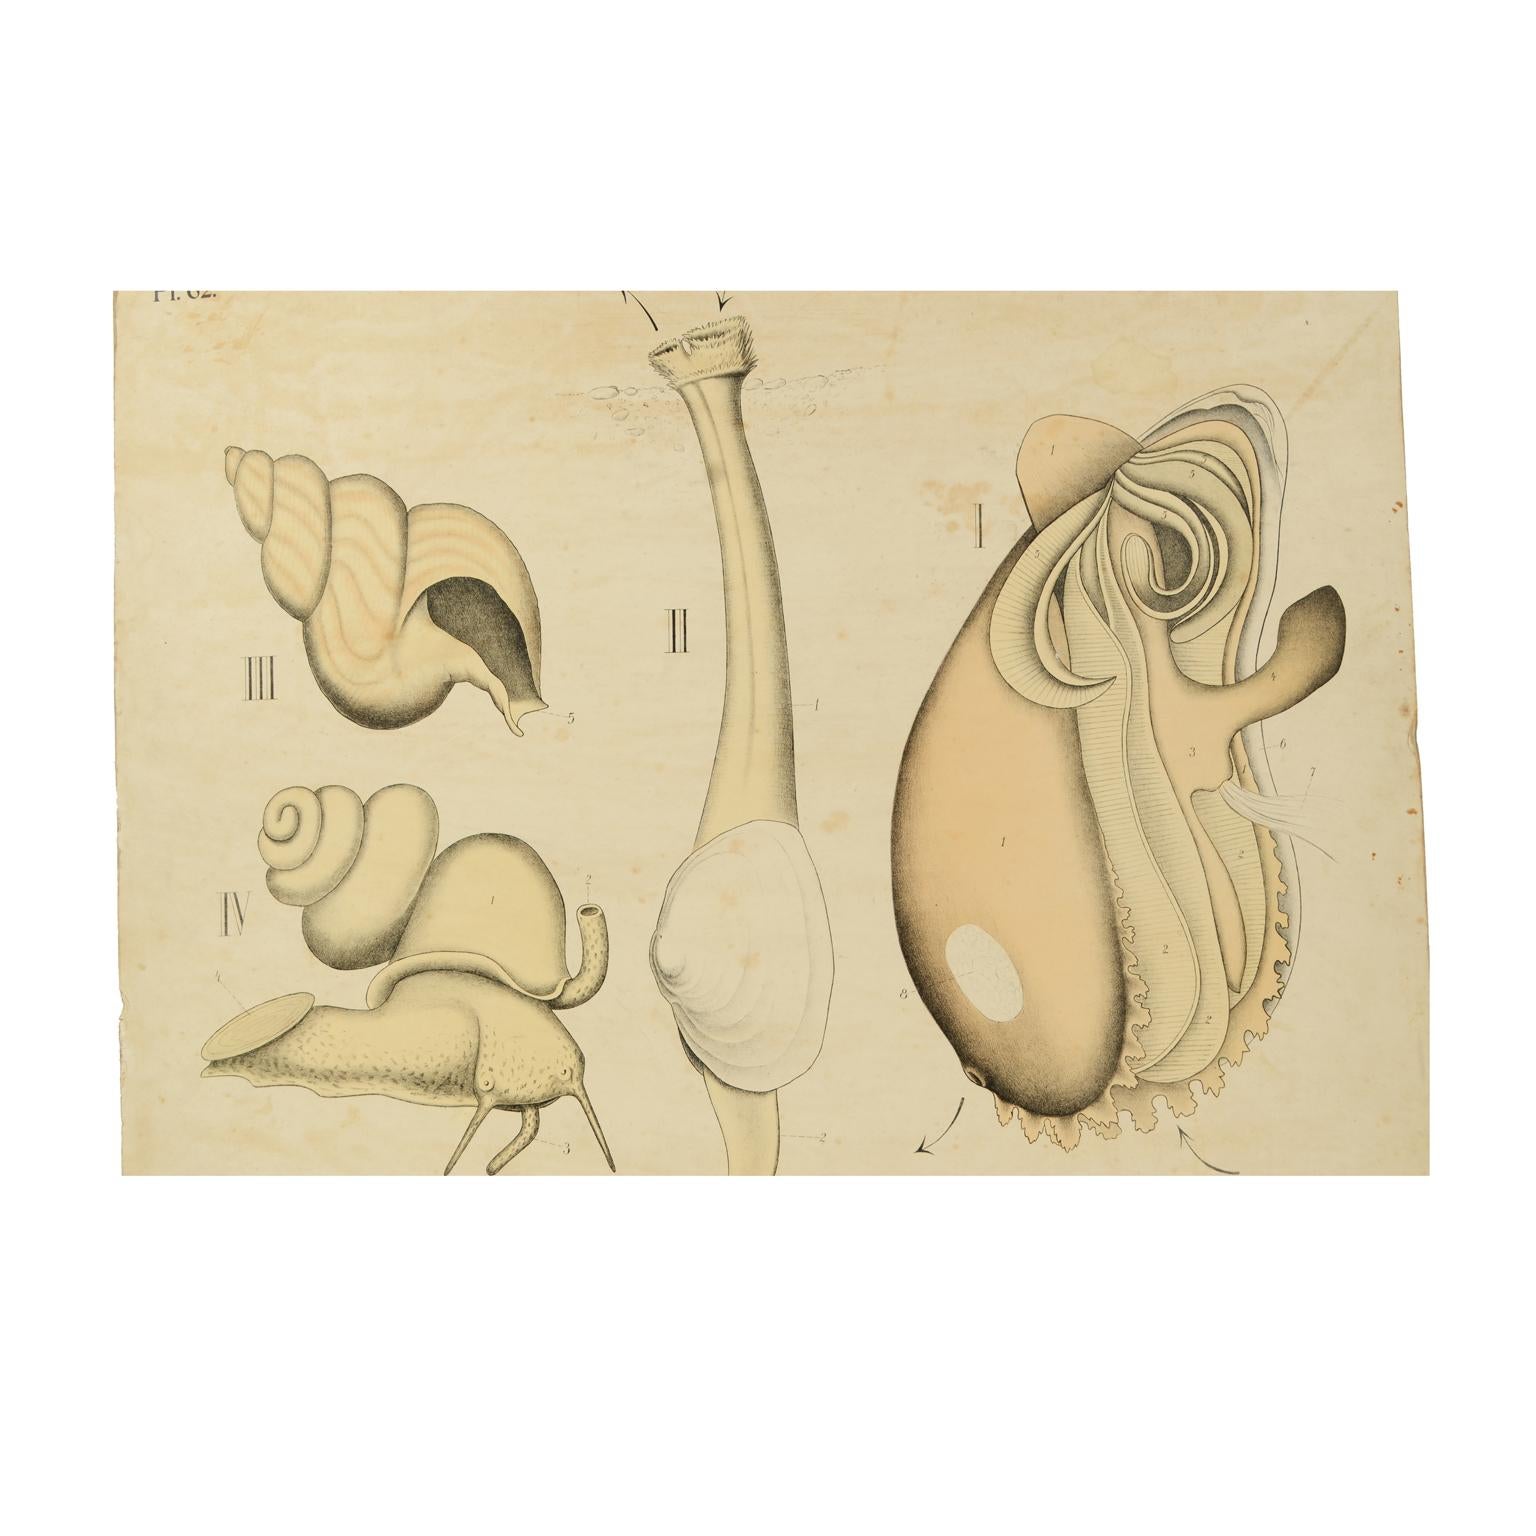 Zoological didactic plate n. 62 lithograph on cardboard made in 1925 depicting molluscs. Dybdhals Zoologiske Plancher P.M.Bye & Co Oslo. Made by H Aschehoug & Co. Good condition. Measures: 77 x 61.3 cm - inches 30.3 x 24.1.

H. Aschehoug & Co. is